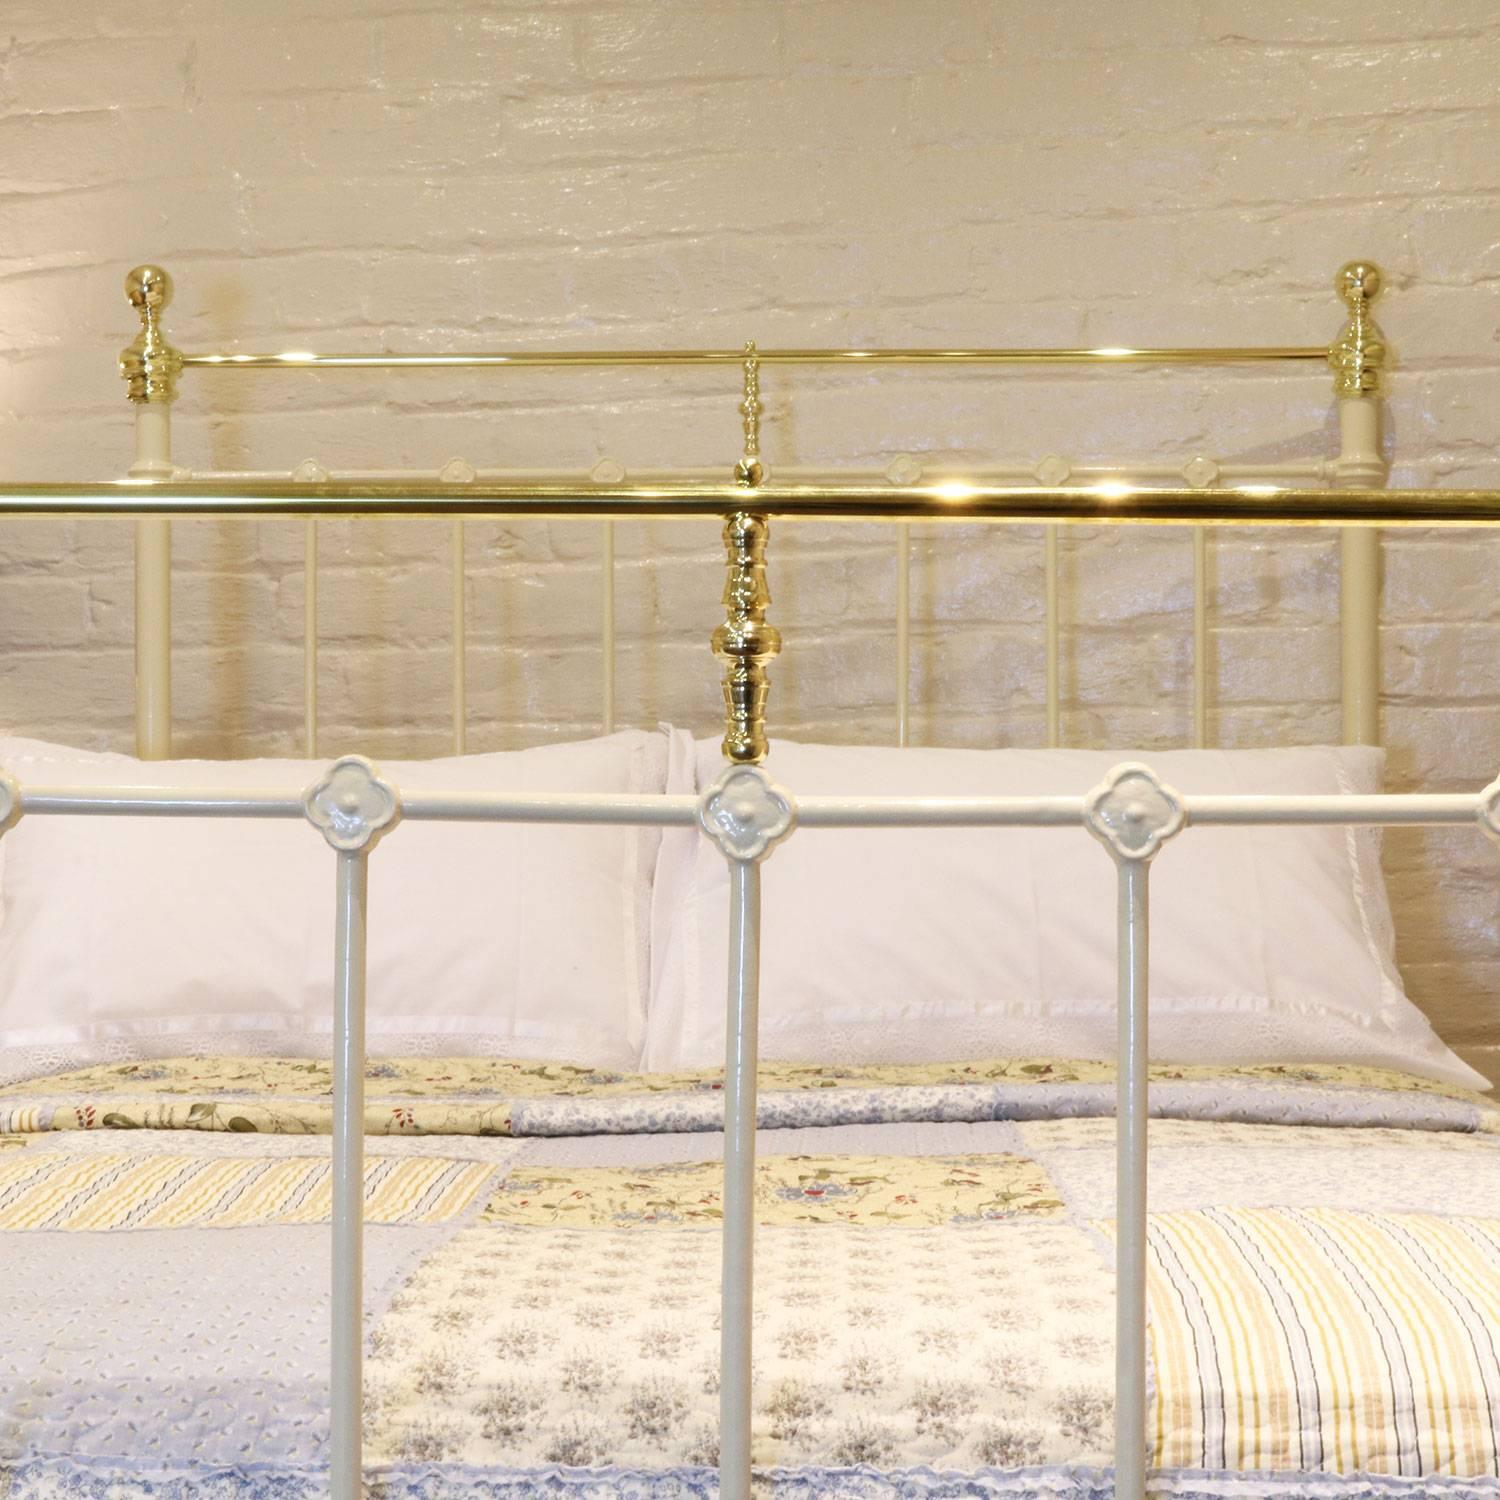 Double brass and iron bedstead in cream with a brass top rail and ornate castings.

This bed accepts a double size (54 inches, 4 ft 6 in or 135 cm wide) base and mattress.

The price is for the bed frame alone. The base, mattress, bedding and